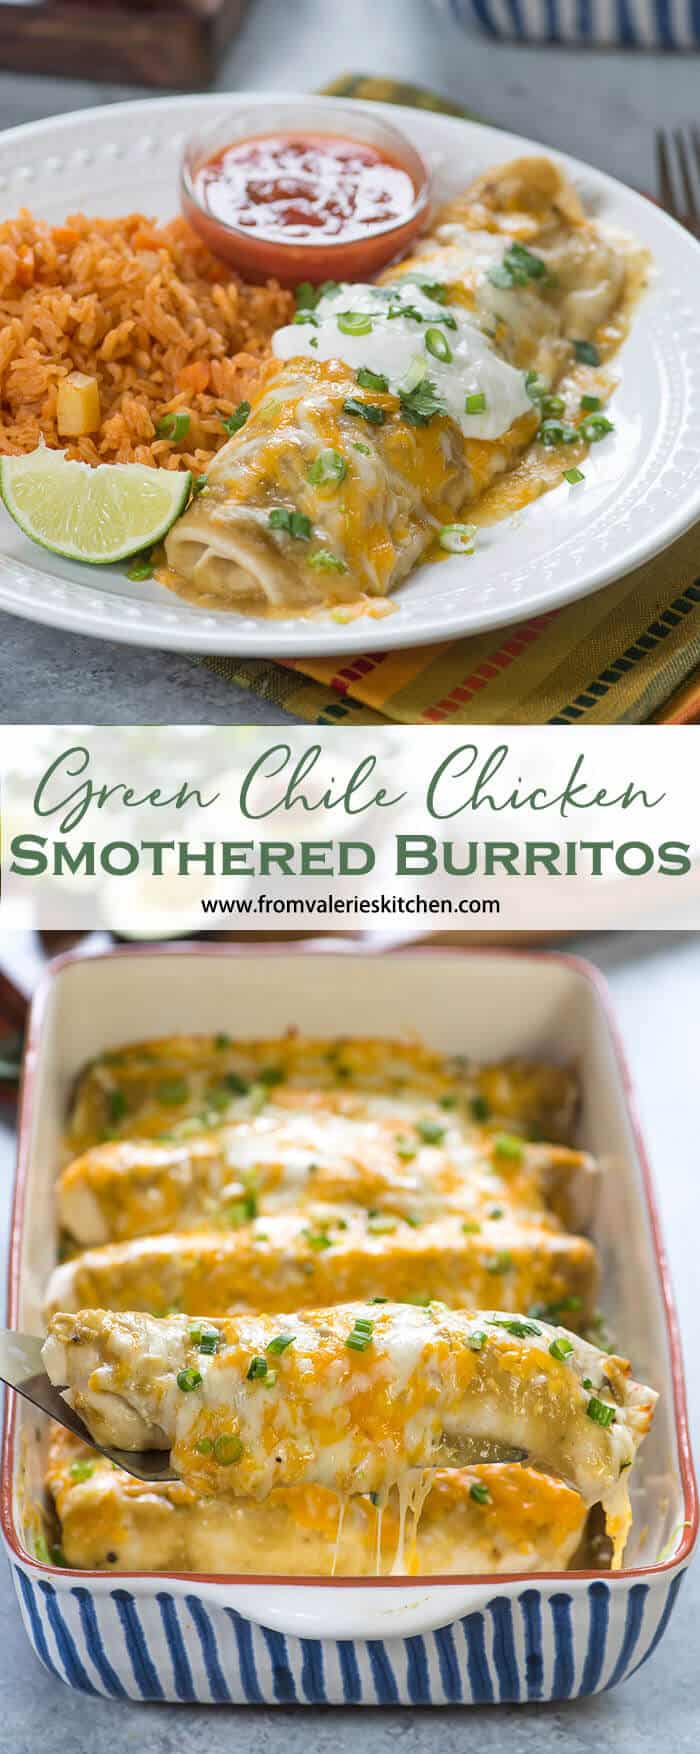 A two image vertical collage of the enchiladas plated and in a casserole dish with overlay text.